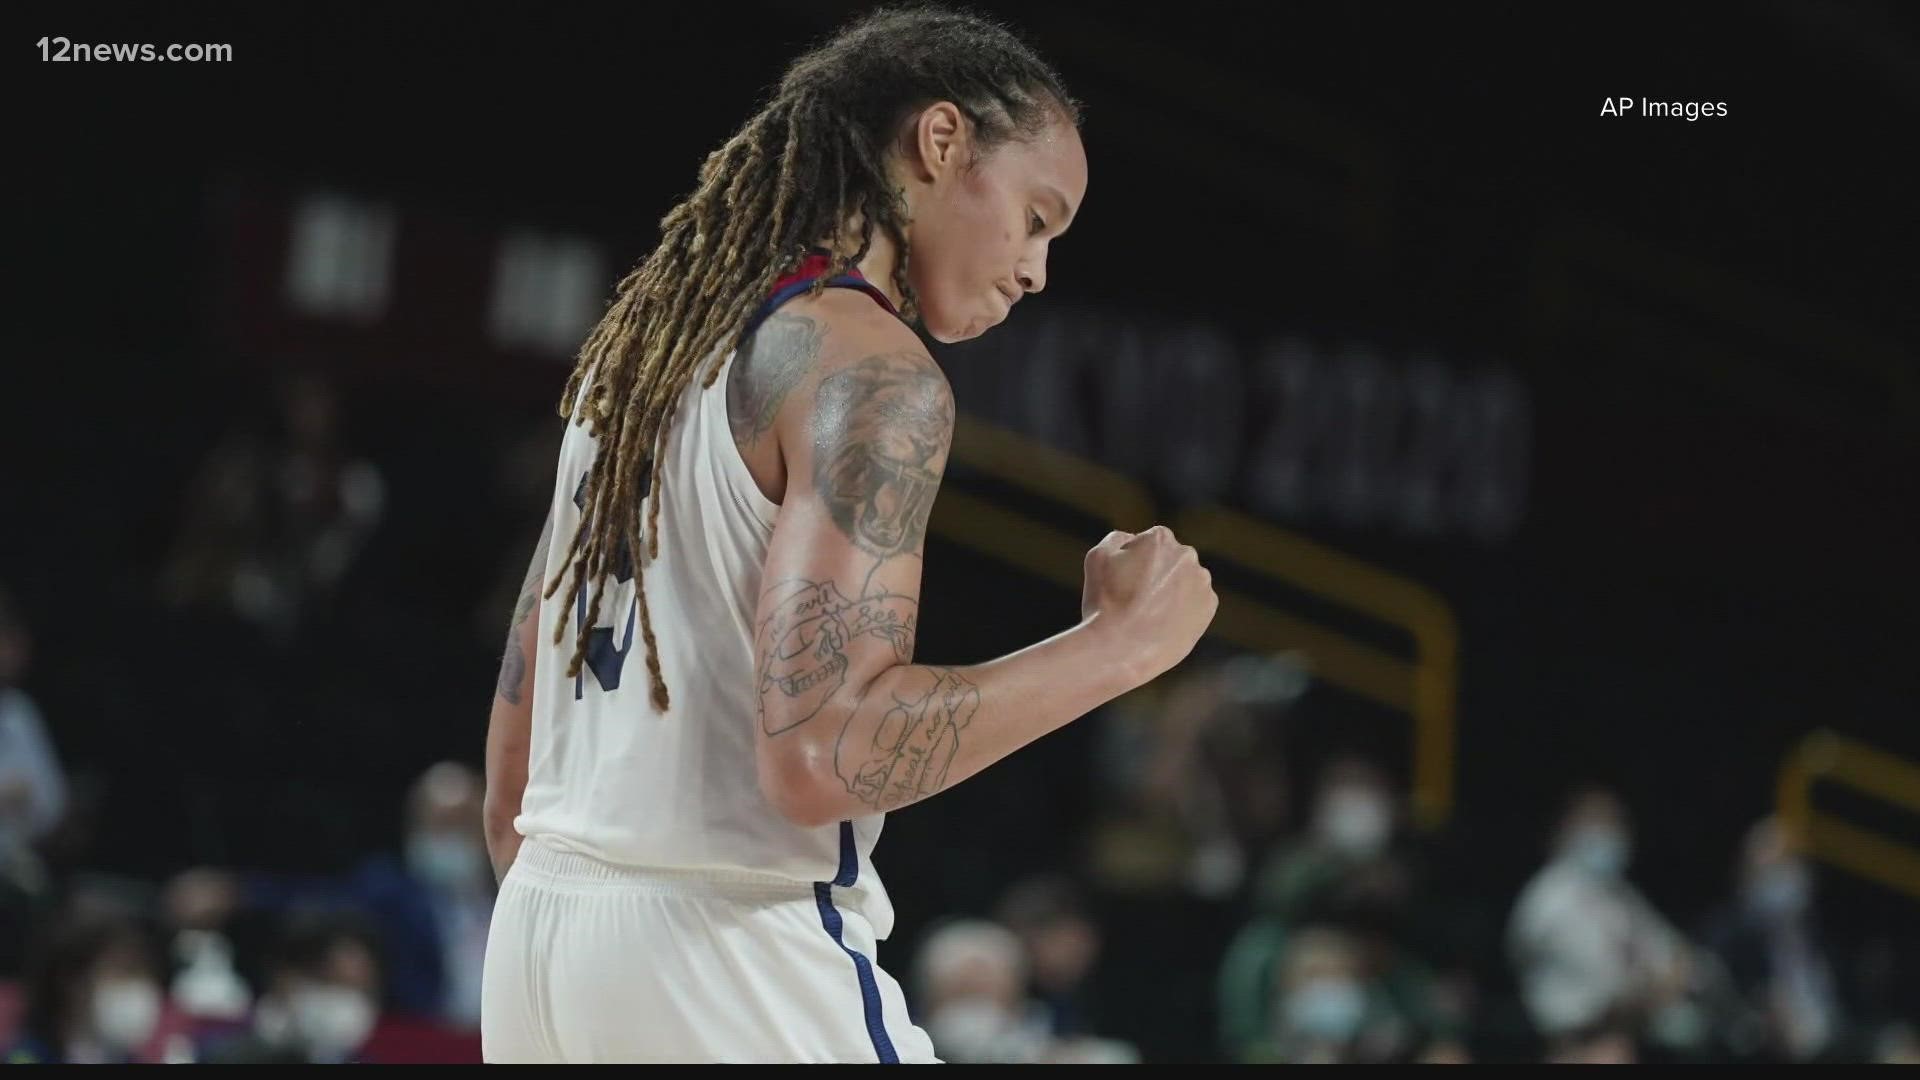 Griner was playing for a Russian team during the WNBA offseason. Authorities in Russia say they found cannabis vape cartridges in her luggage.